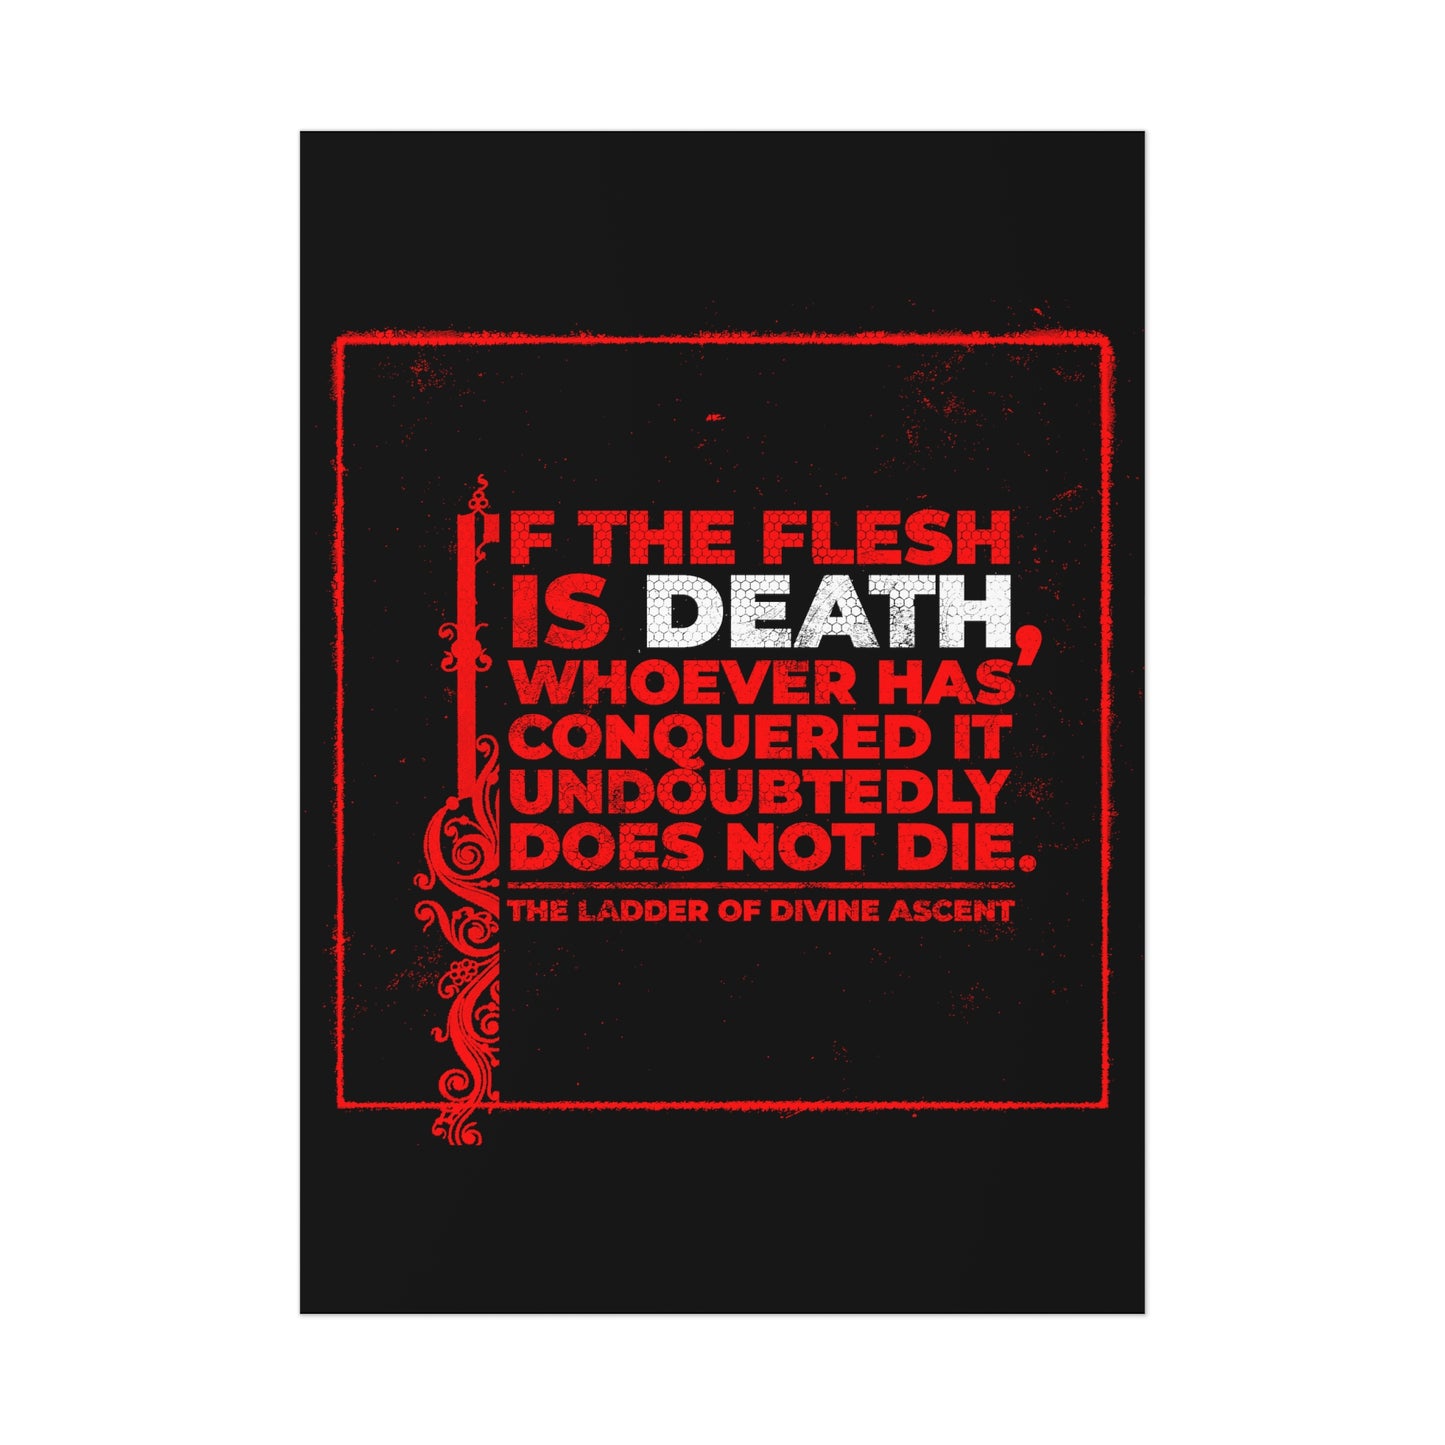 If the Flesh is Death (Ladder of Divine Ascent) No. 2 | Orthodox Christian Art Poster